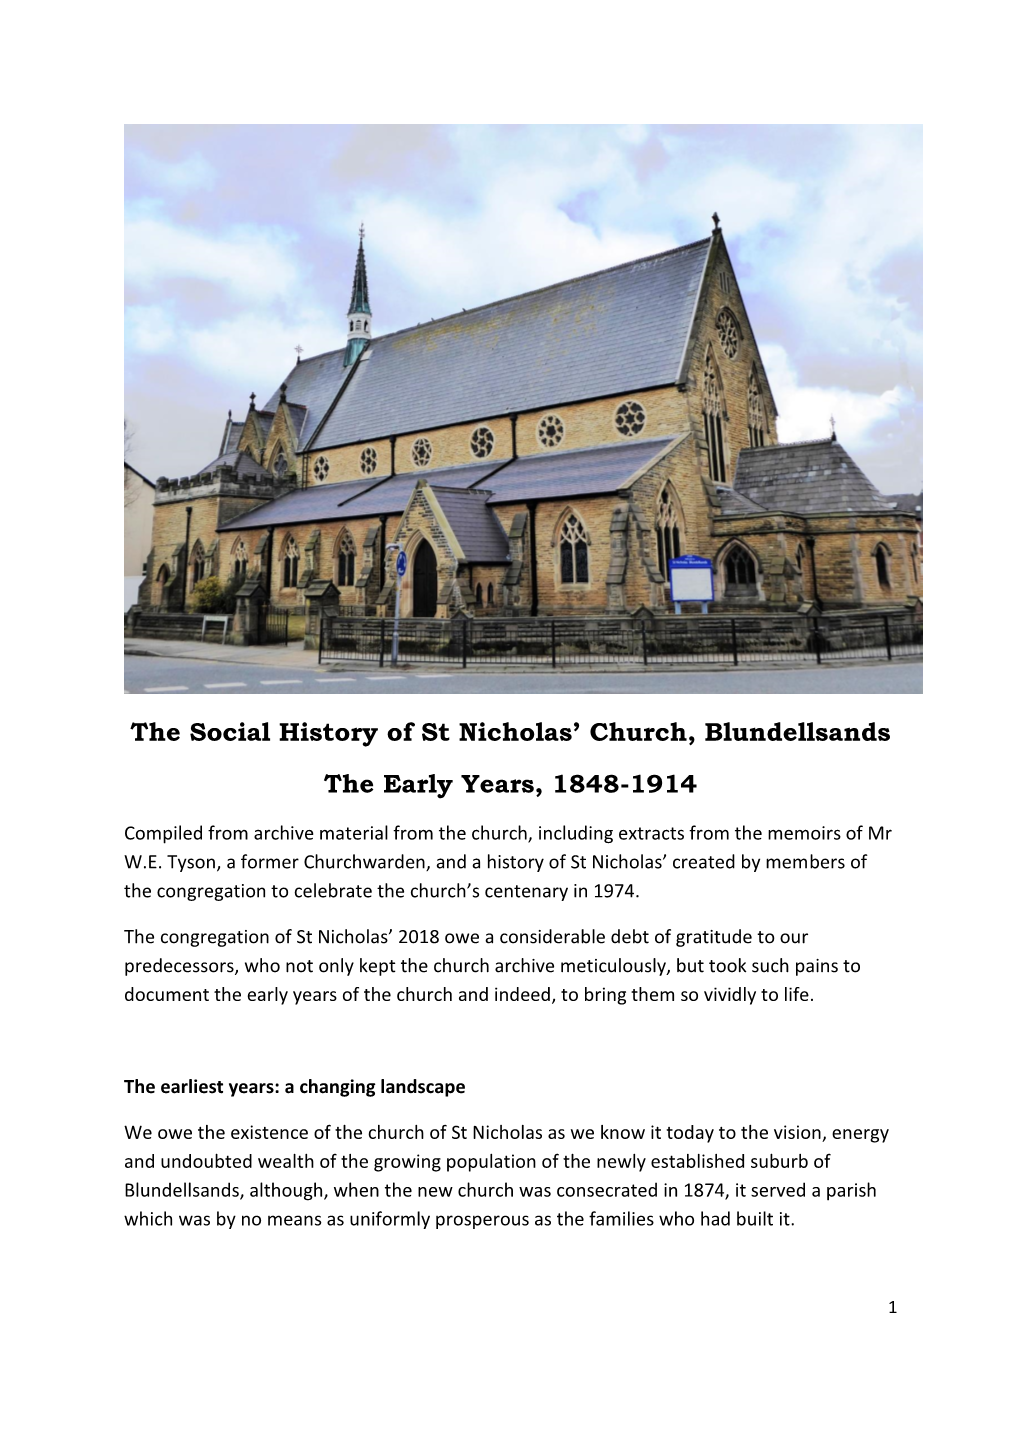 The Social History of St Nicholas' Church, Blundellsands the Early Years, 1848-1914